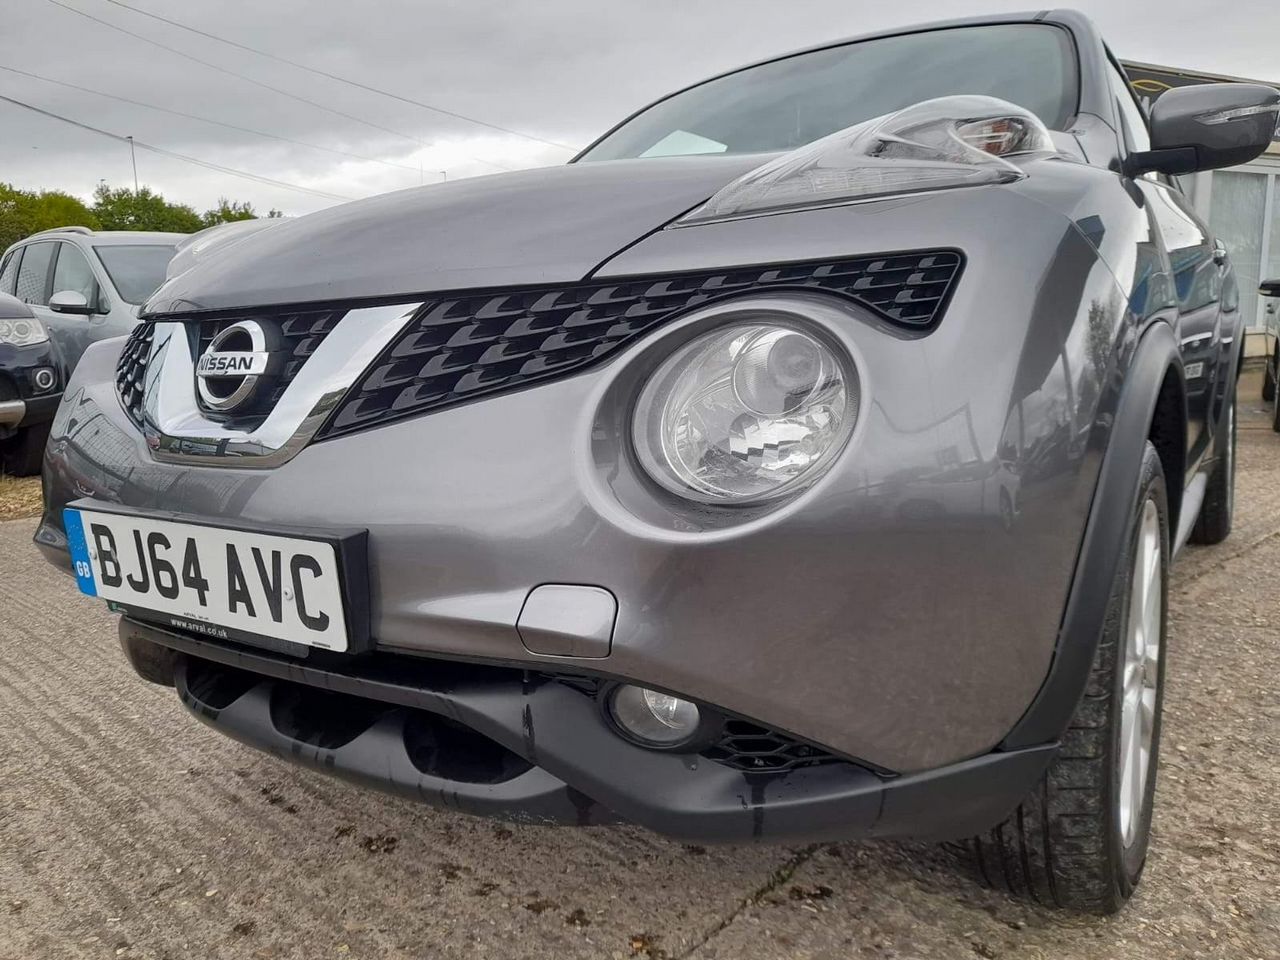 2014 Nissan Juke 1.5 dCi 8v Acenta Euro 5 (s/s) 5dr - Picture 11 of 48